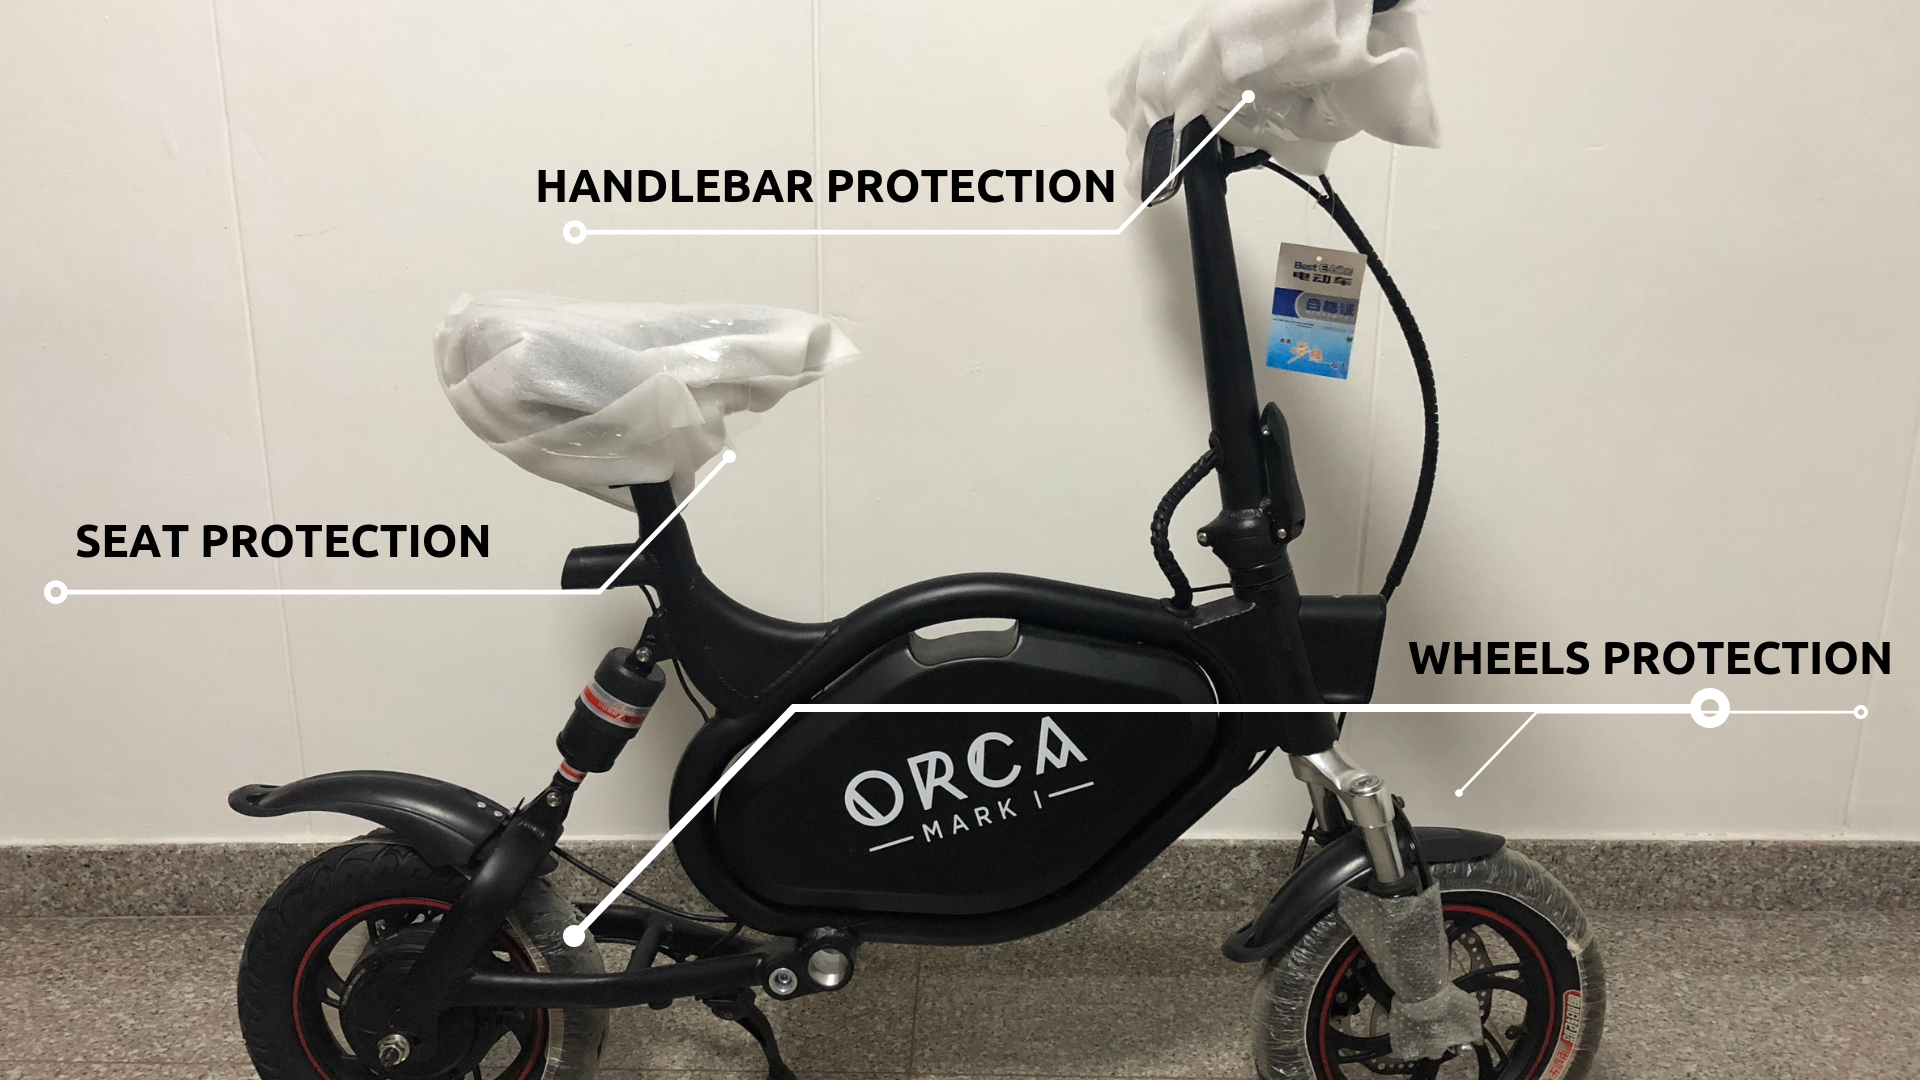 orca mark I electric scooter shipping protection